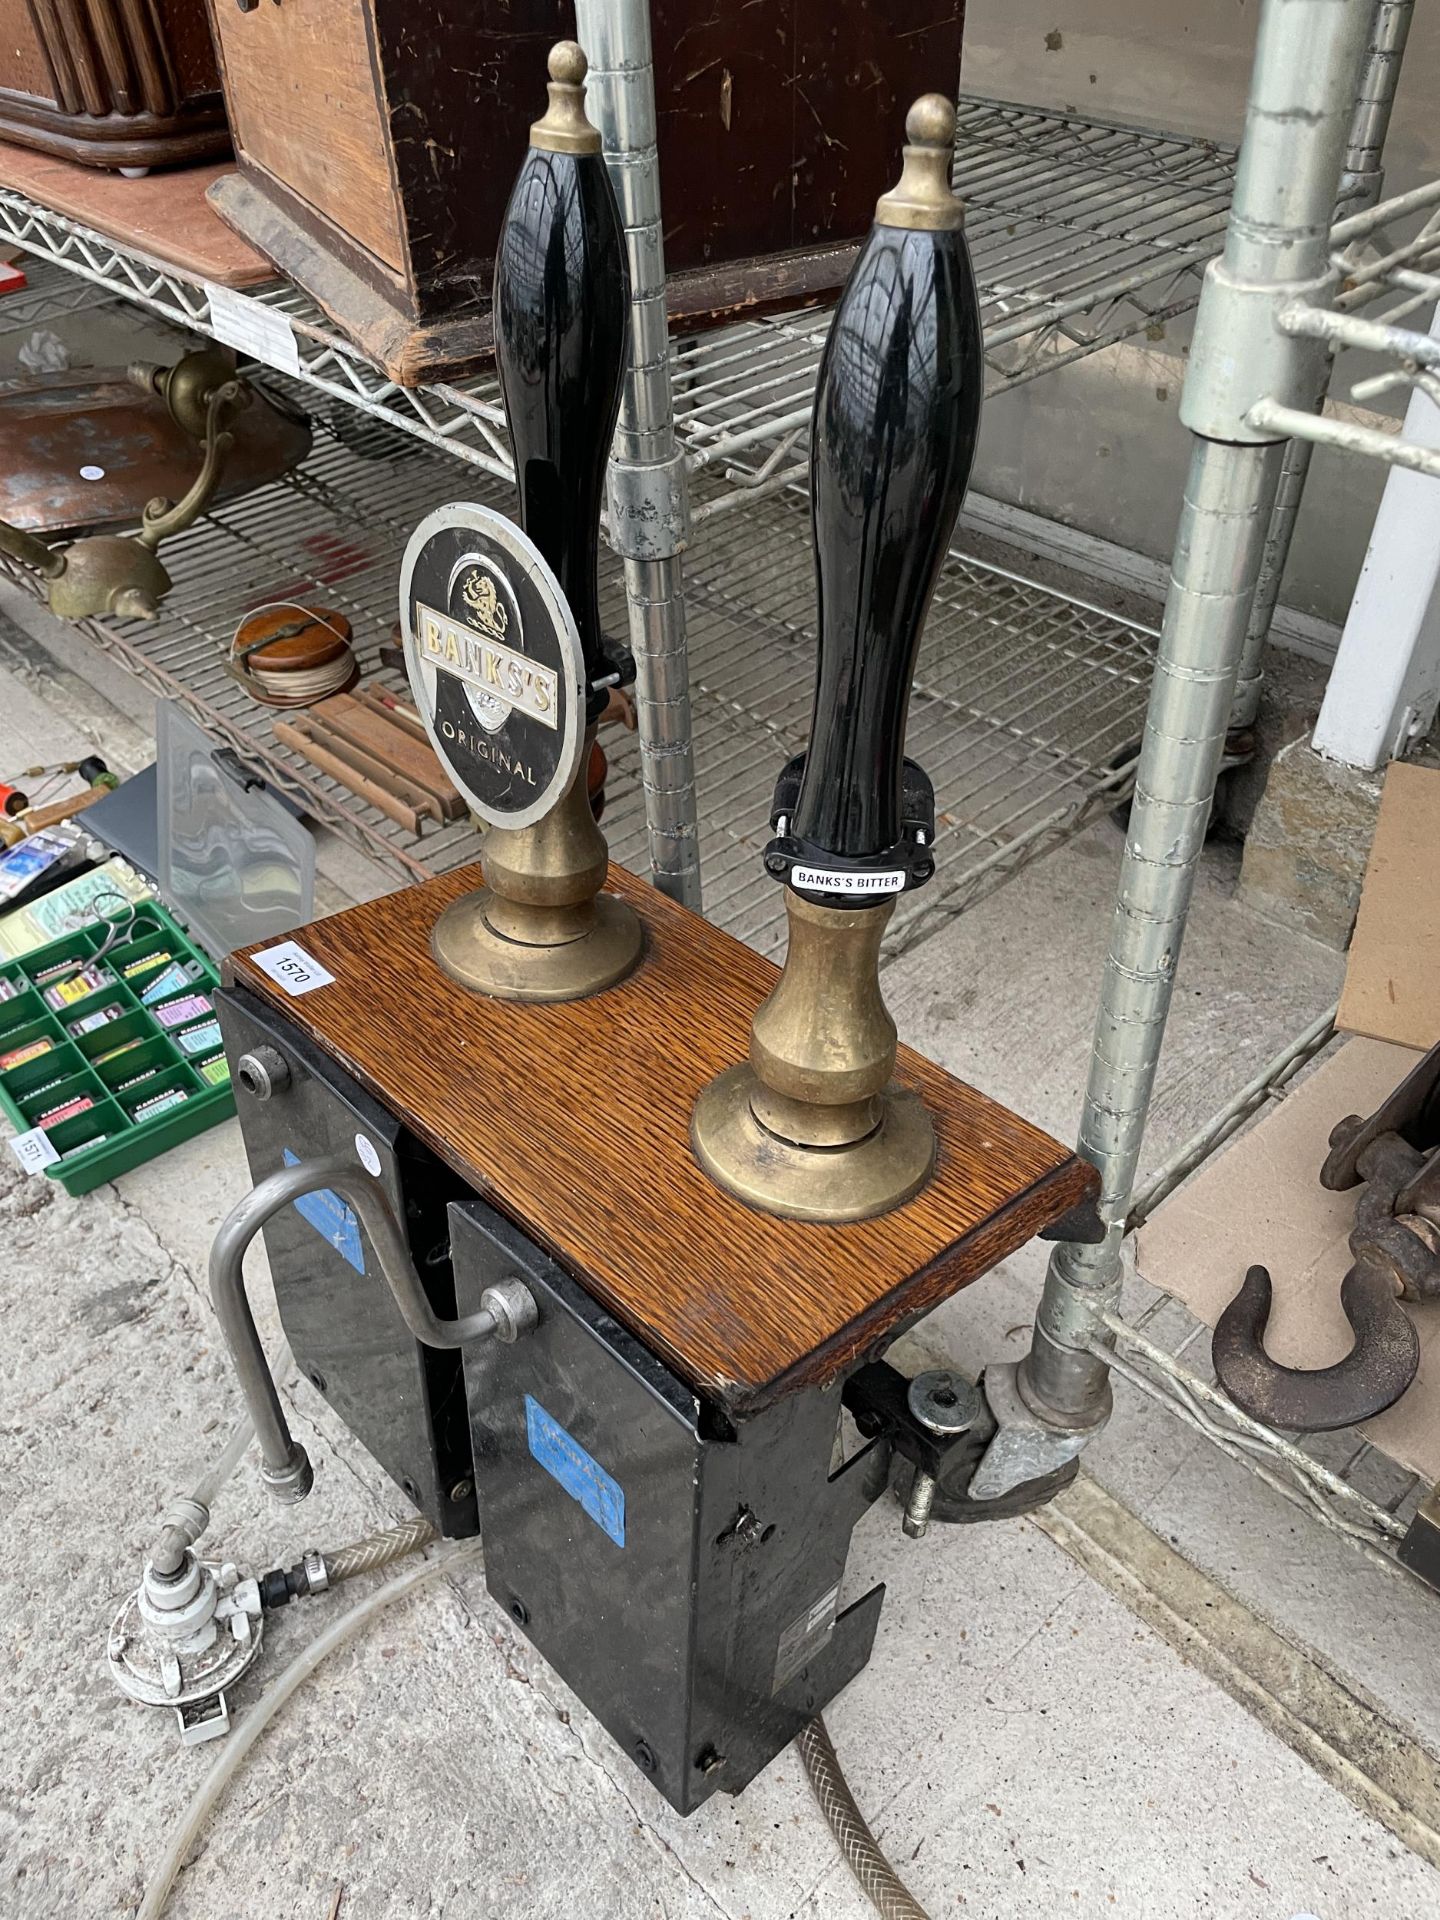 A VINTAGE REAL ALE BRASS AND WOODEN HAND BEER PUMP - Image 2 of 5